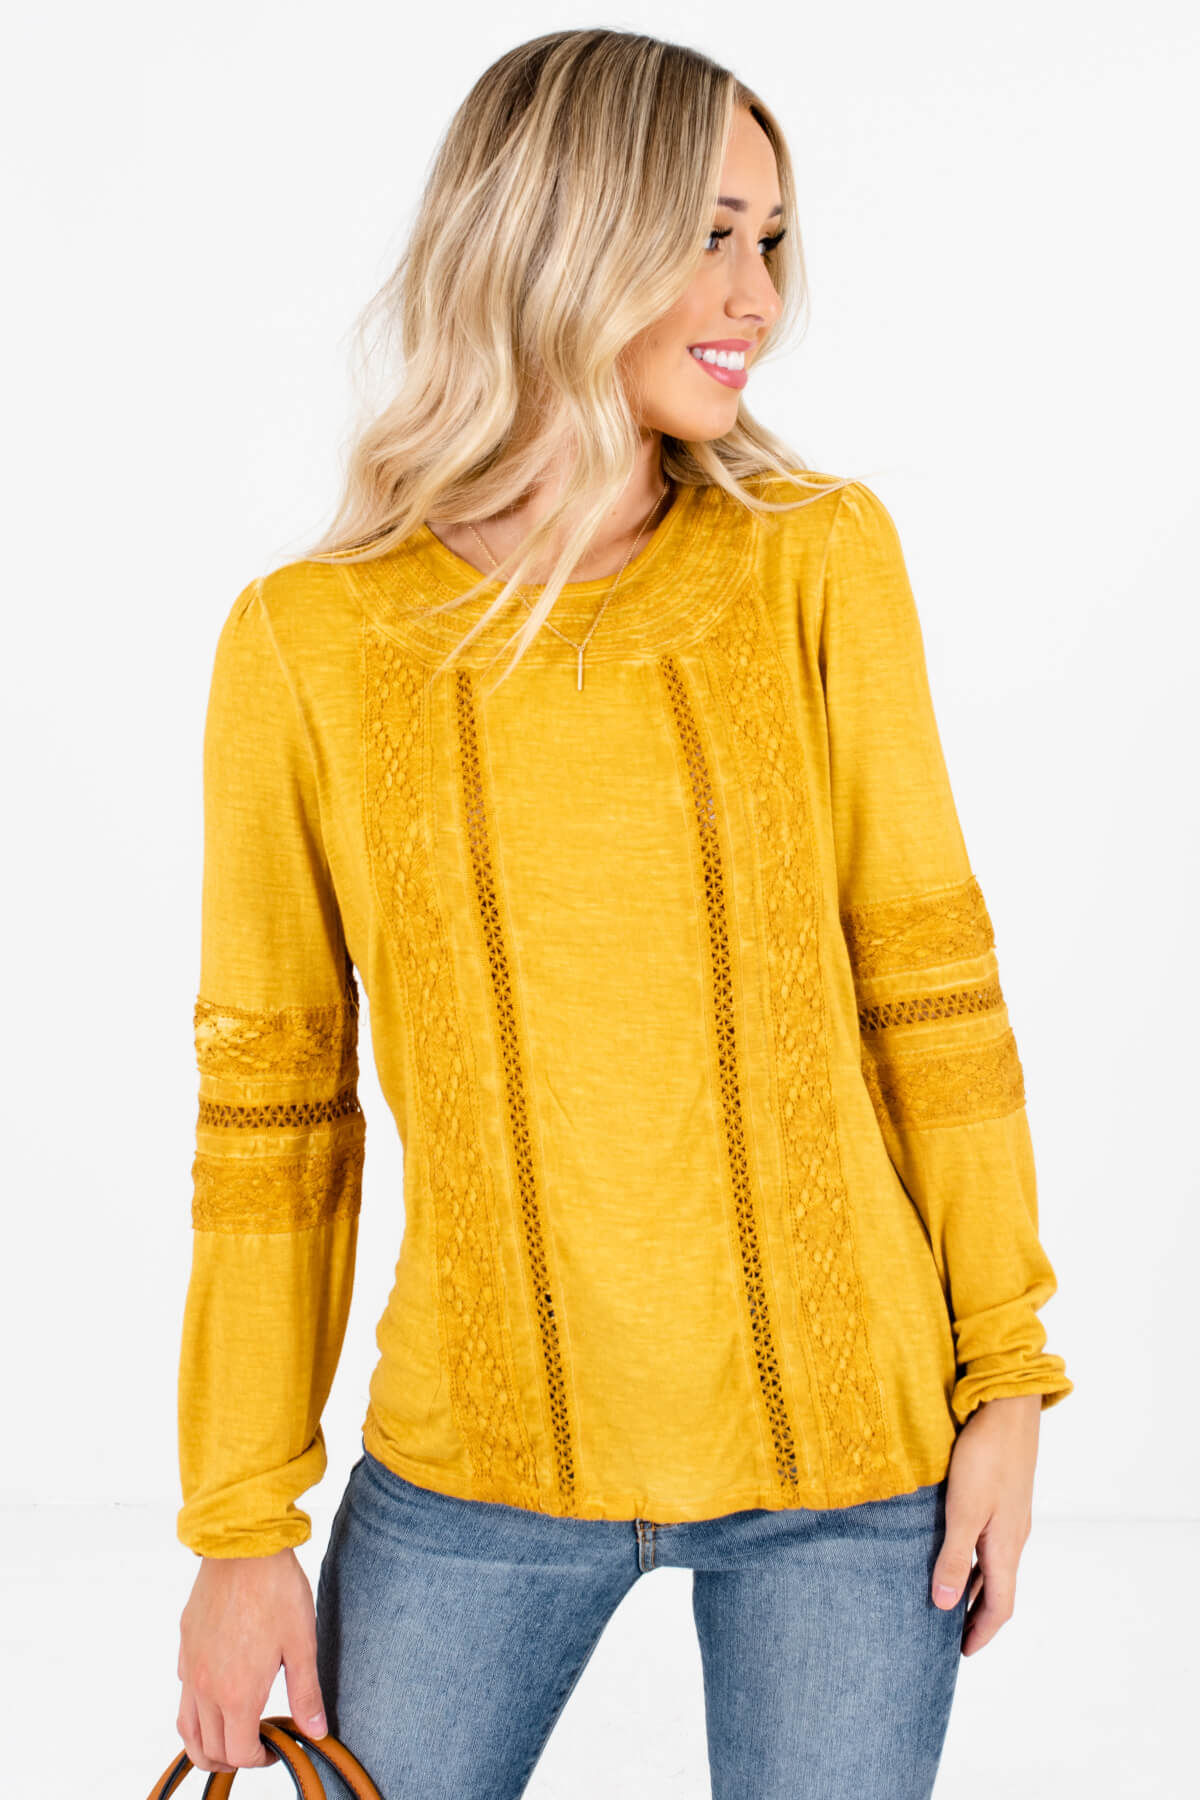 Mustard Yellow Crochet Lace Accented Boutique Tops for Women